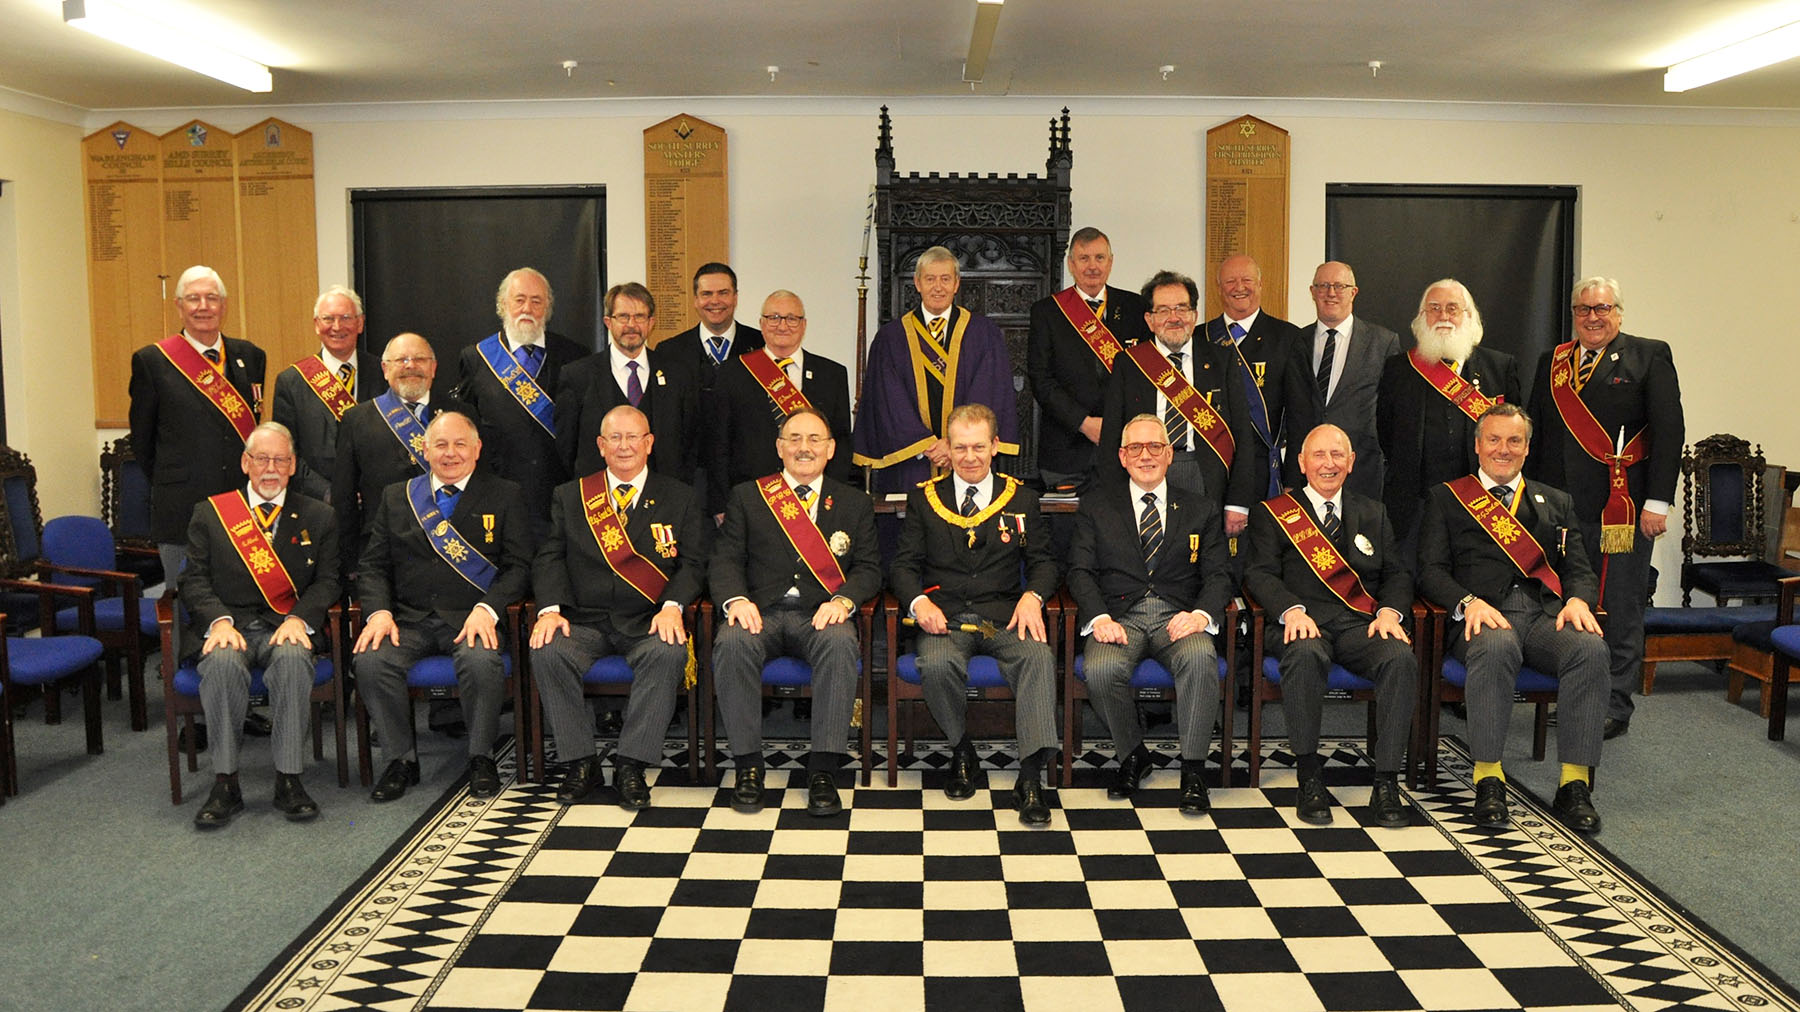 A Princes Degree for Warlingham Conclave